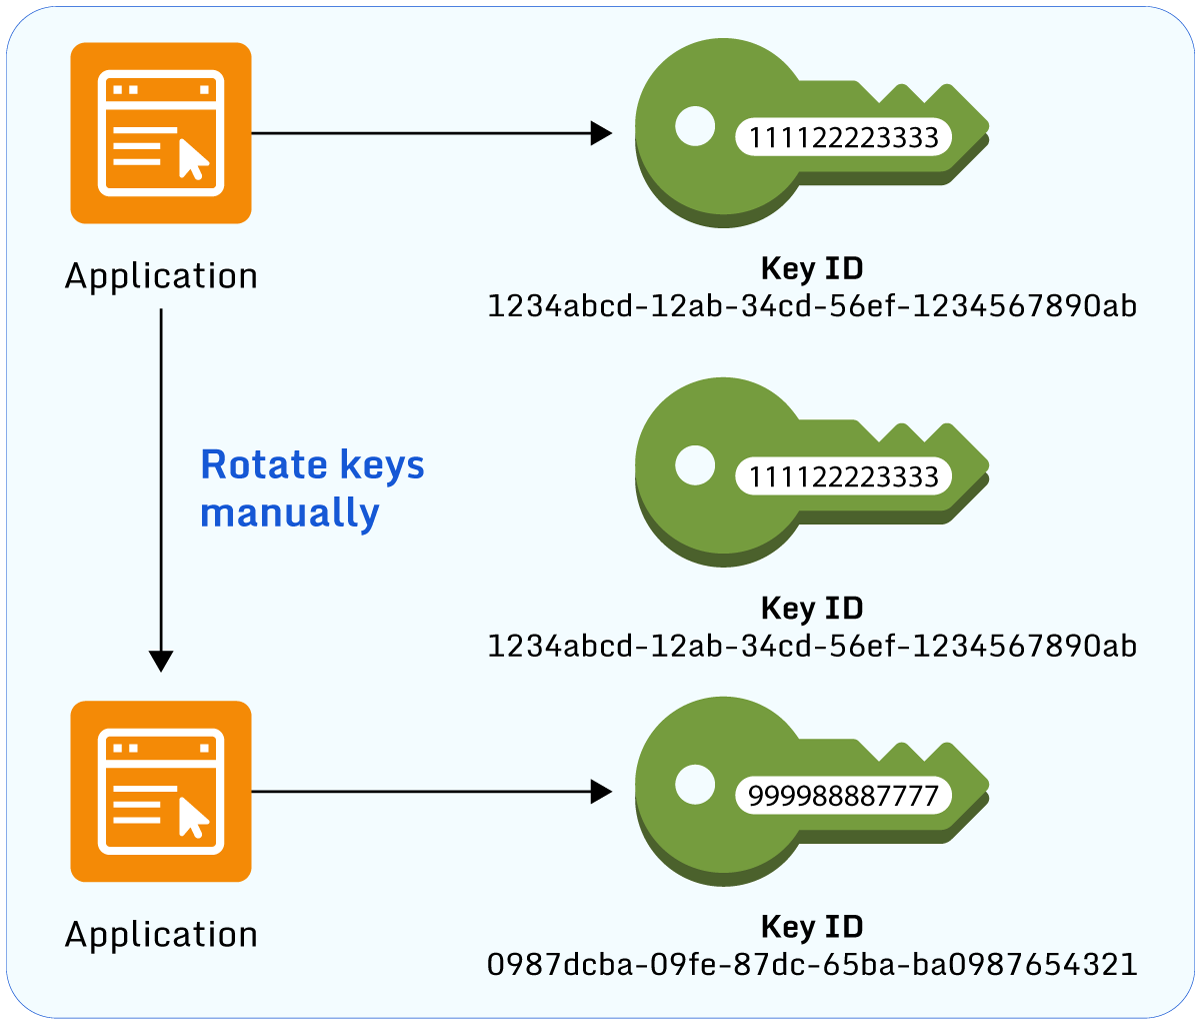 Automatic key rotation in AWS KMS. 